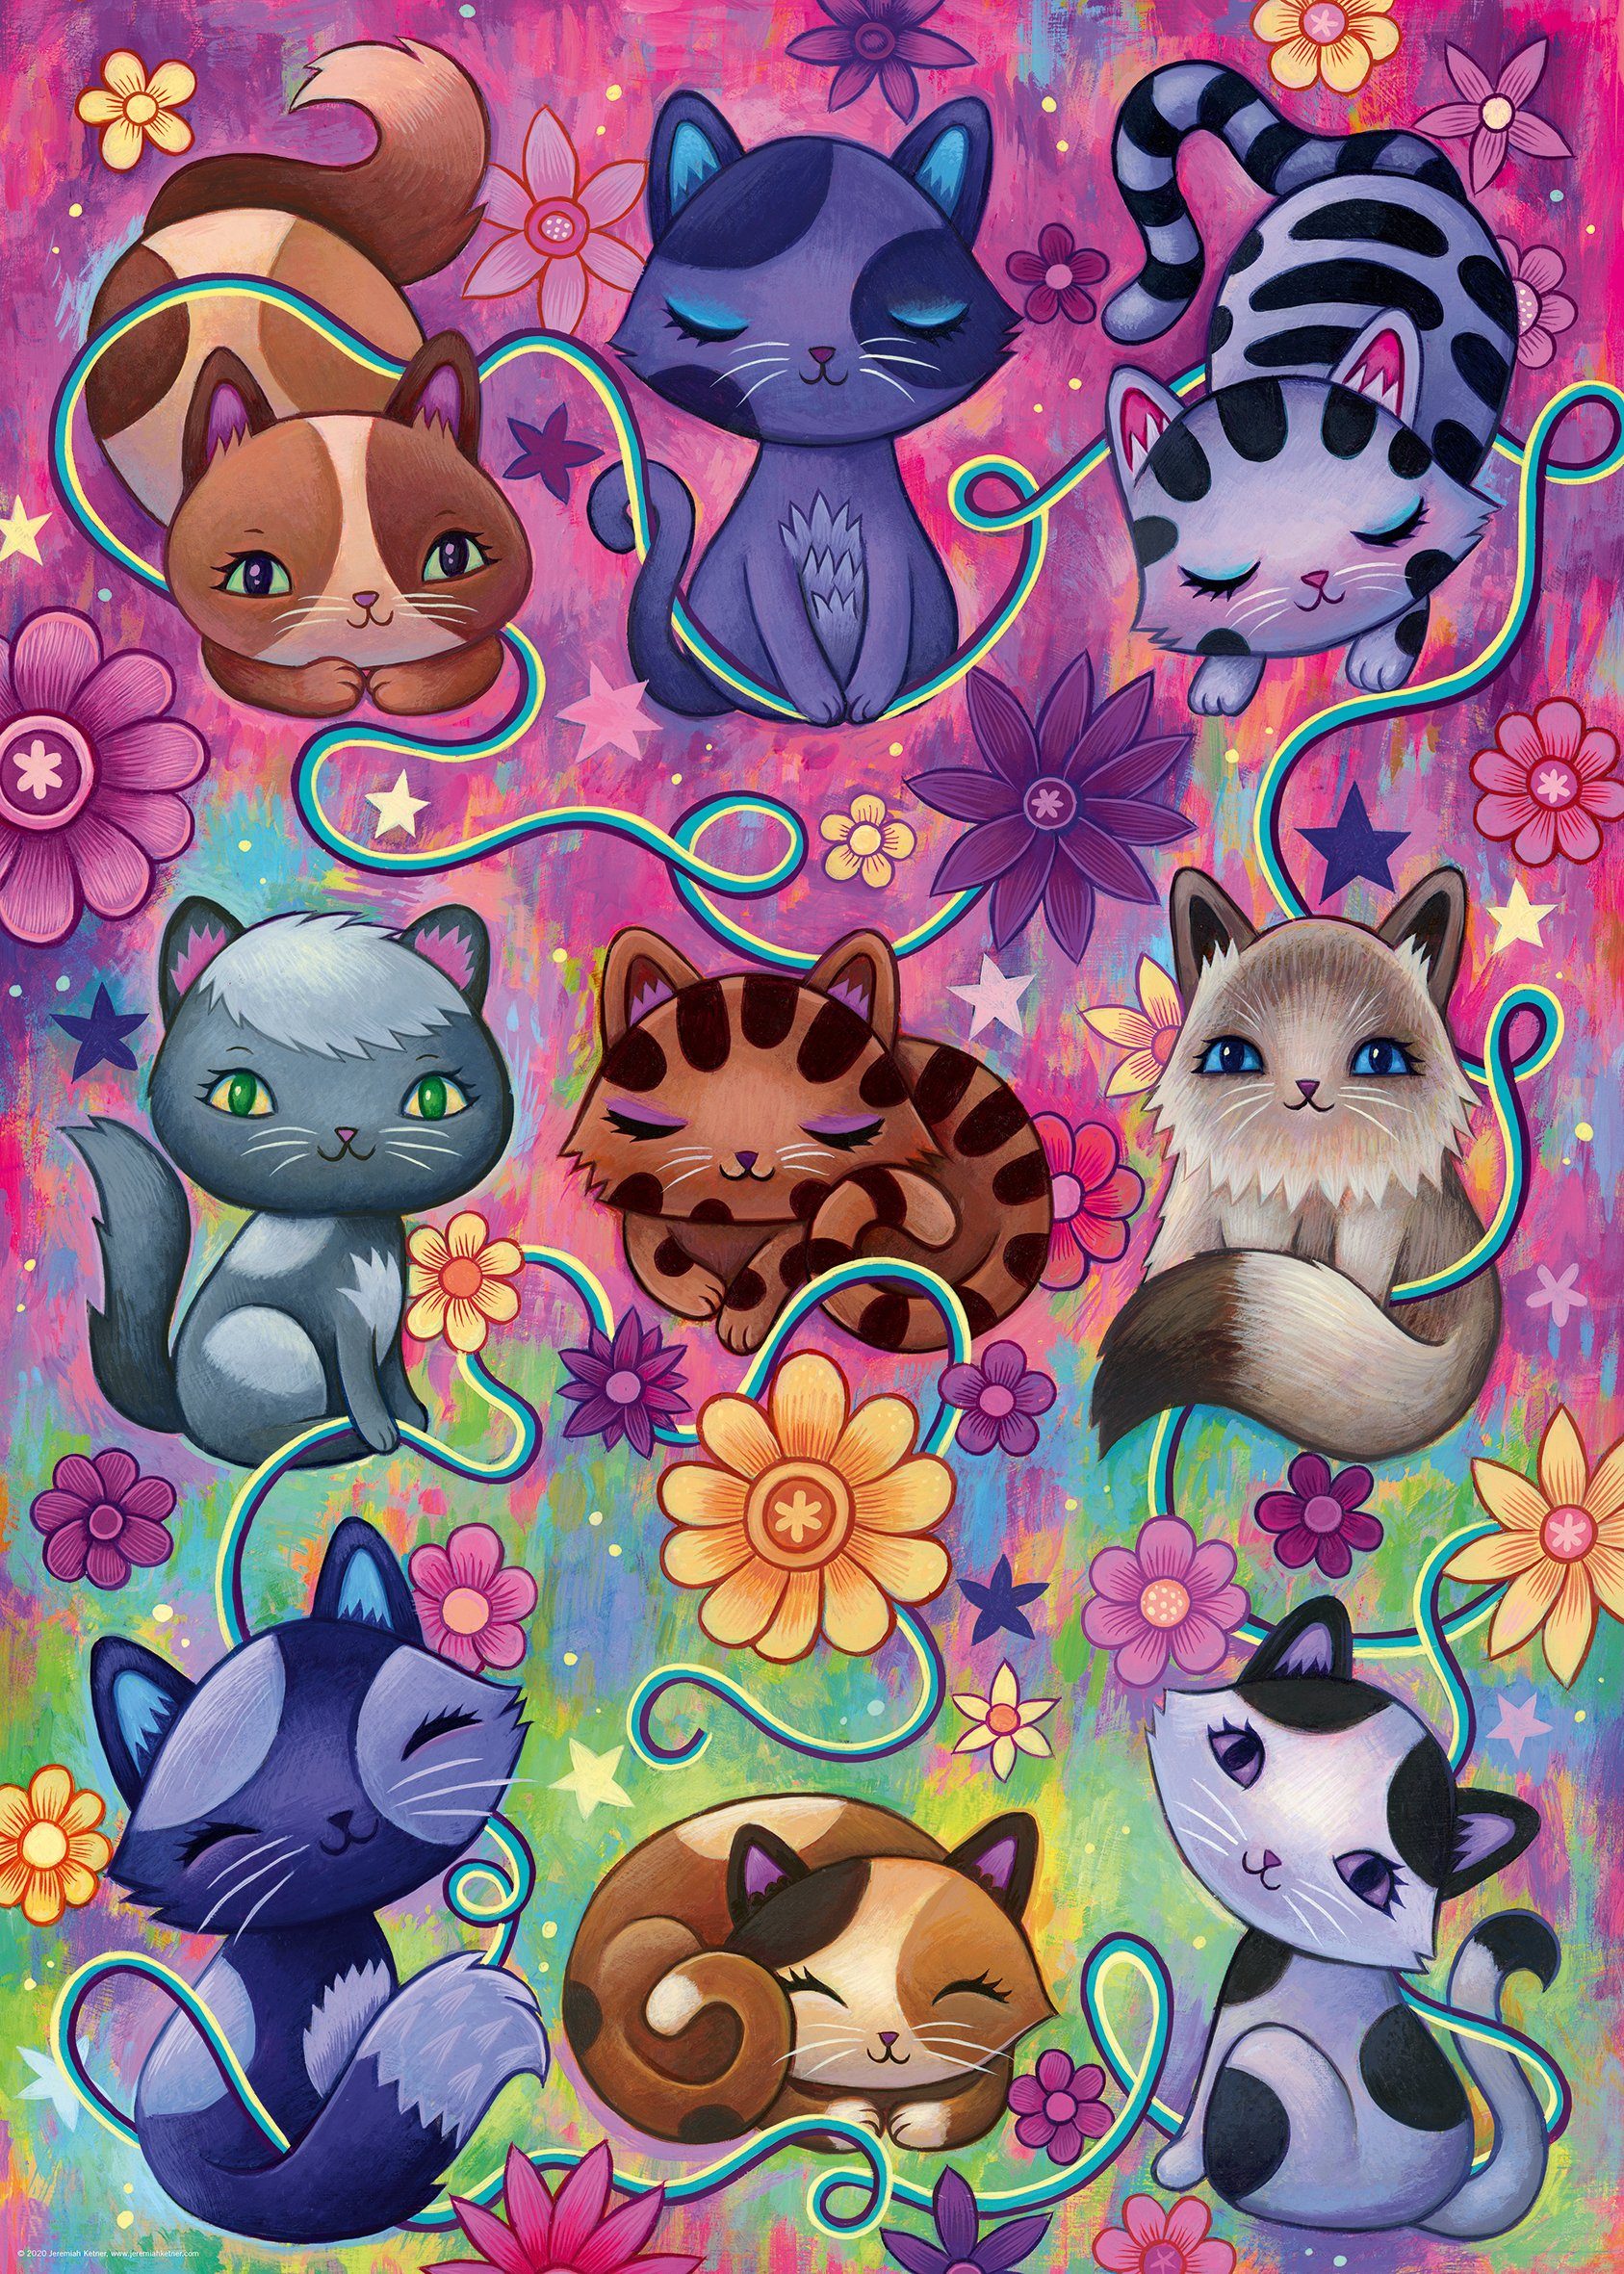 HEYE 1000 Made Puzzleteile, Dreaming, Cats Kitty Puzzle / Germany in